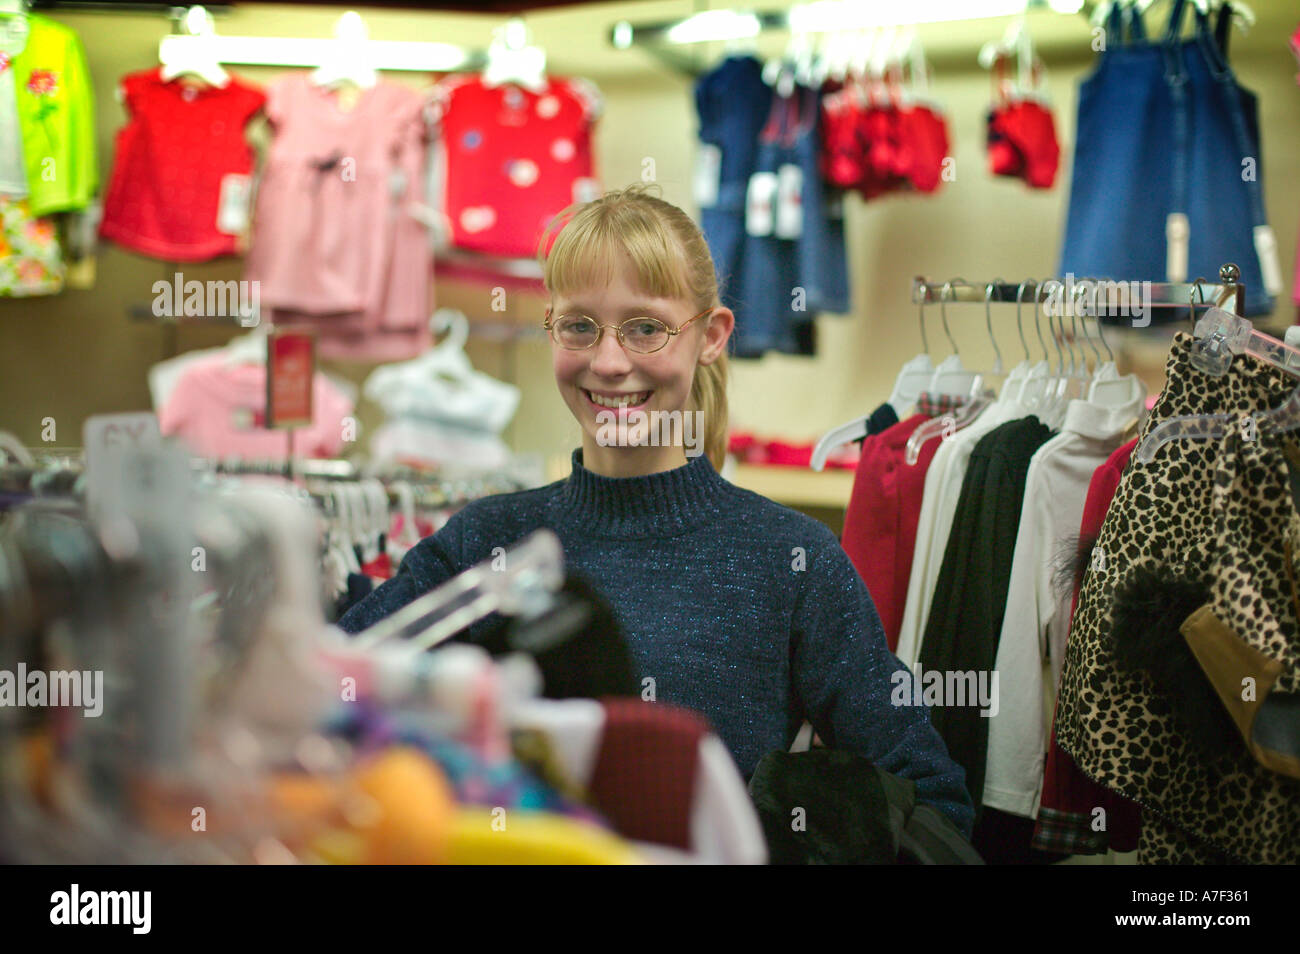 Twelve Year Old Girl Shopping For New Clothes In Department Store Stock Photo